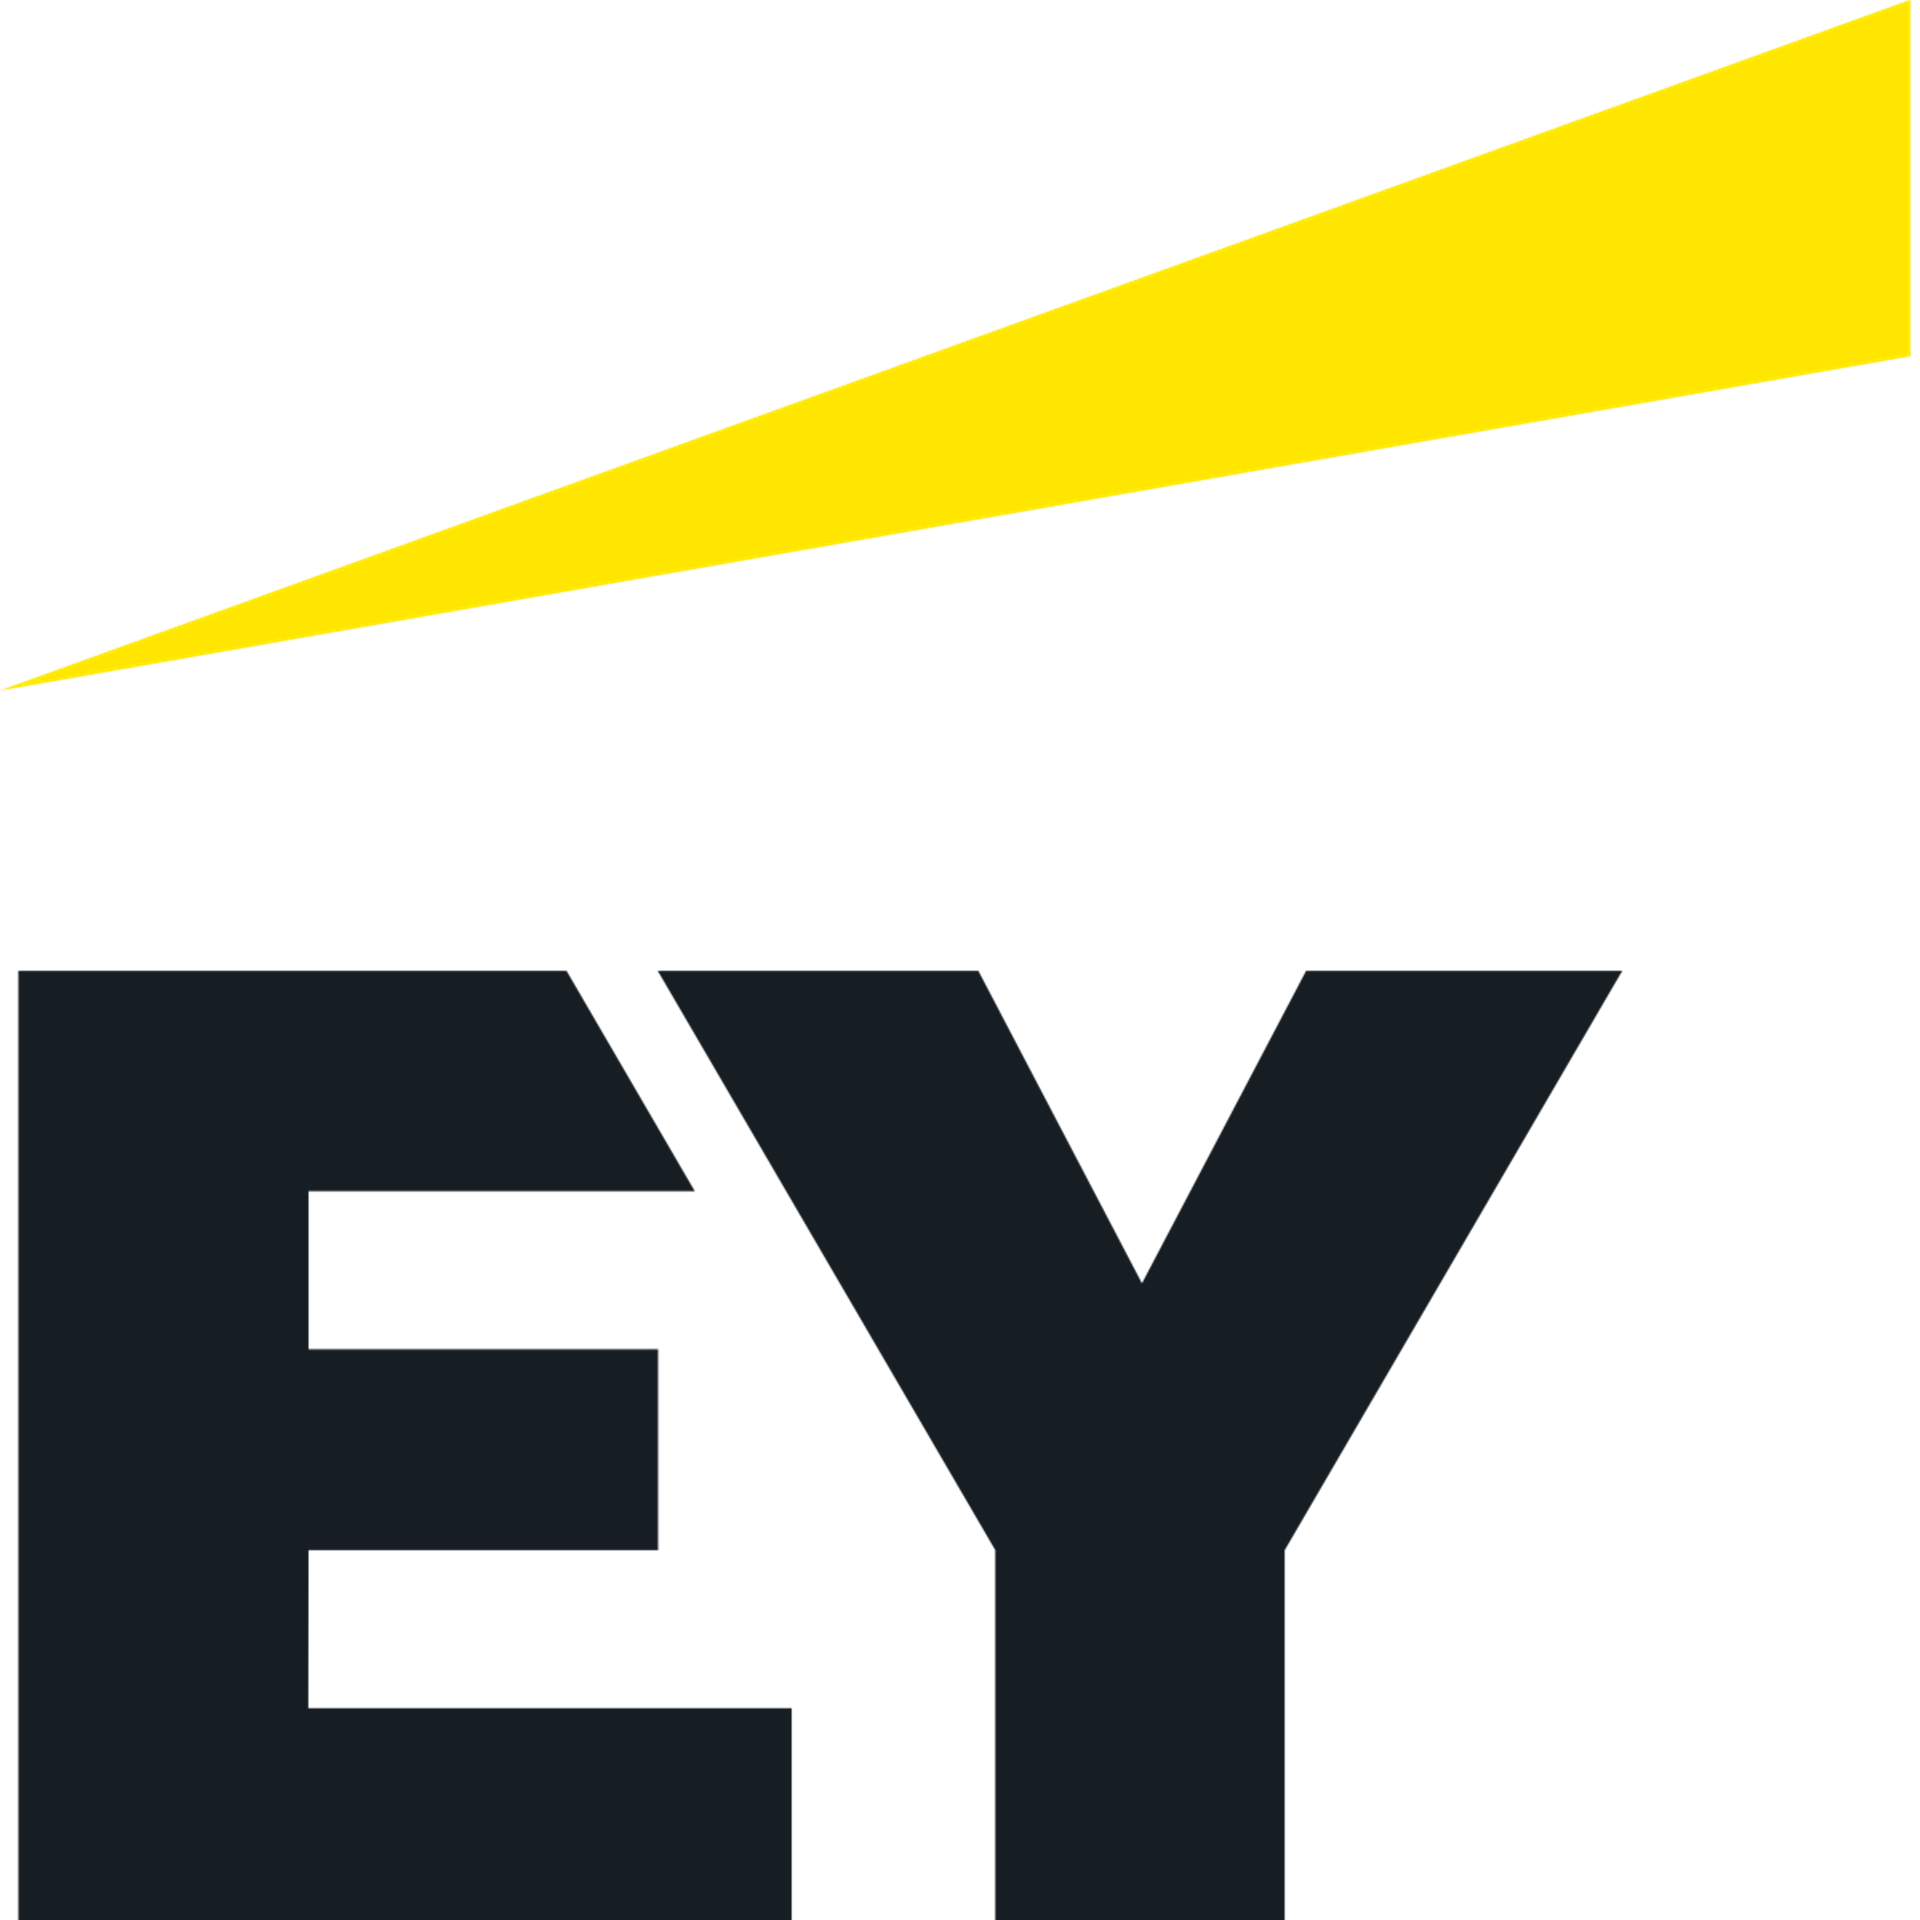 ERNST & YOUNG AS